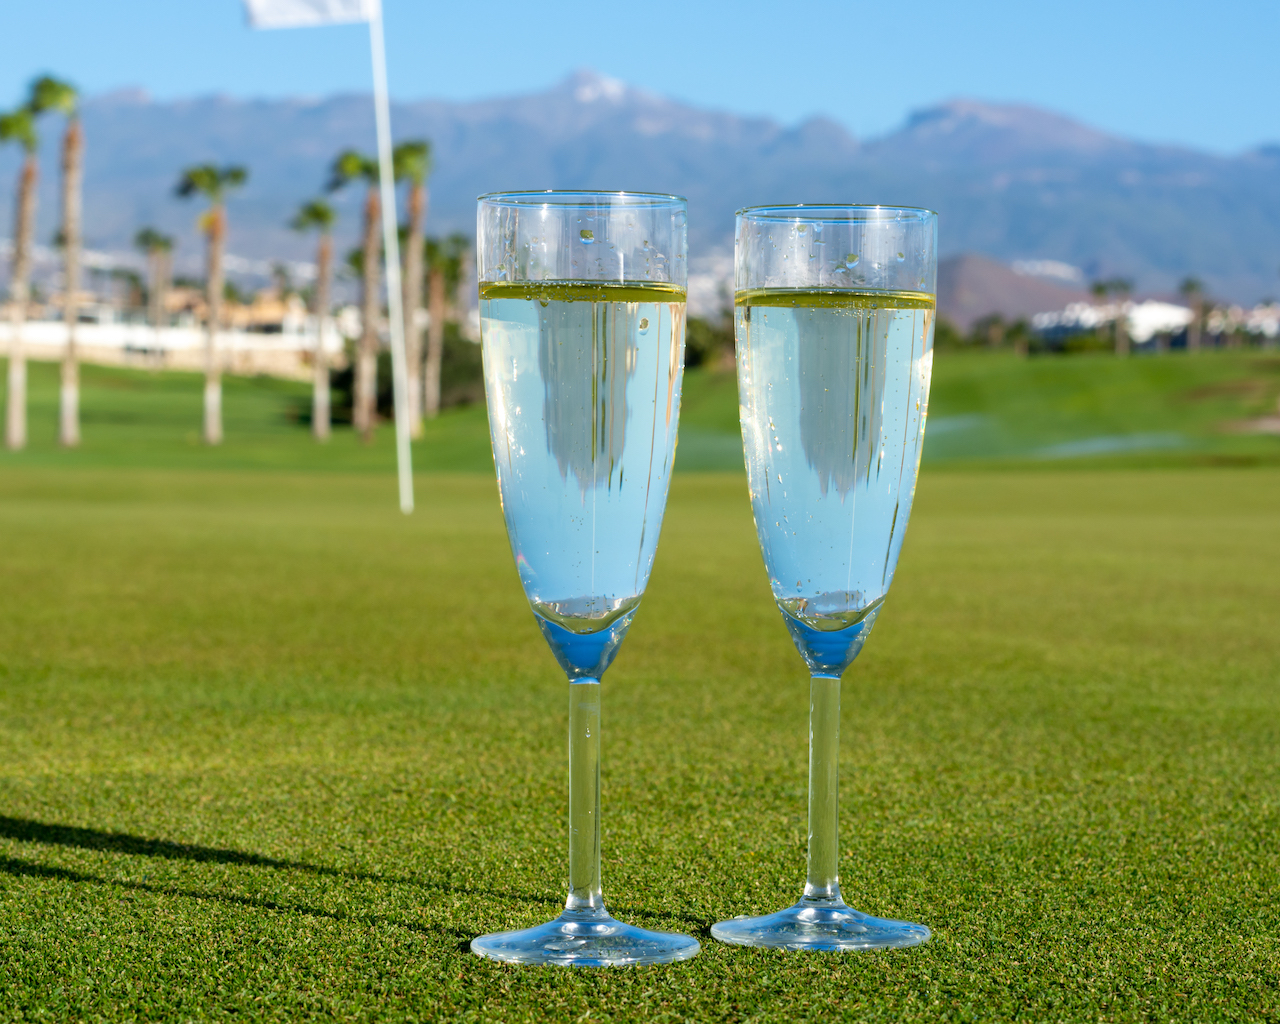 champagne glasses on golf putting green